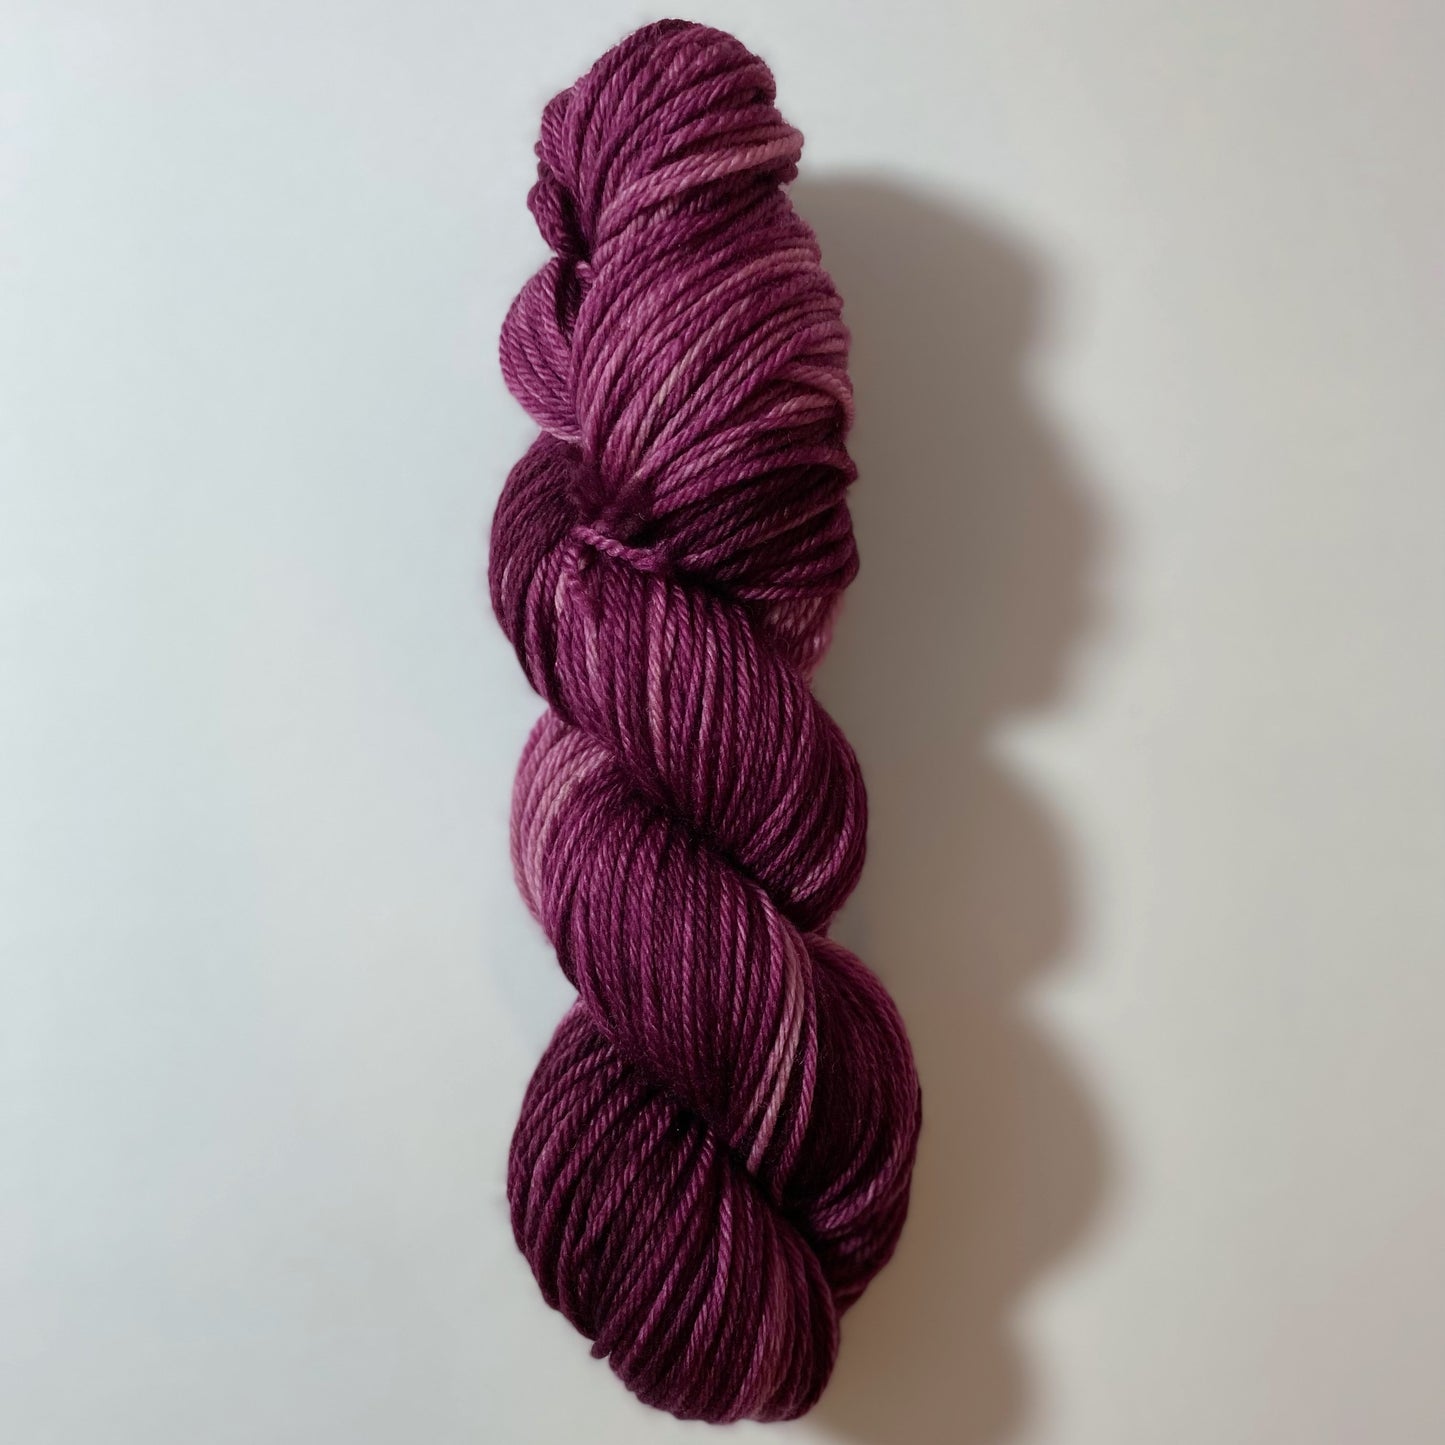 Dyed to Order - Wine-of-a-Kind